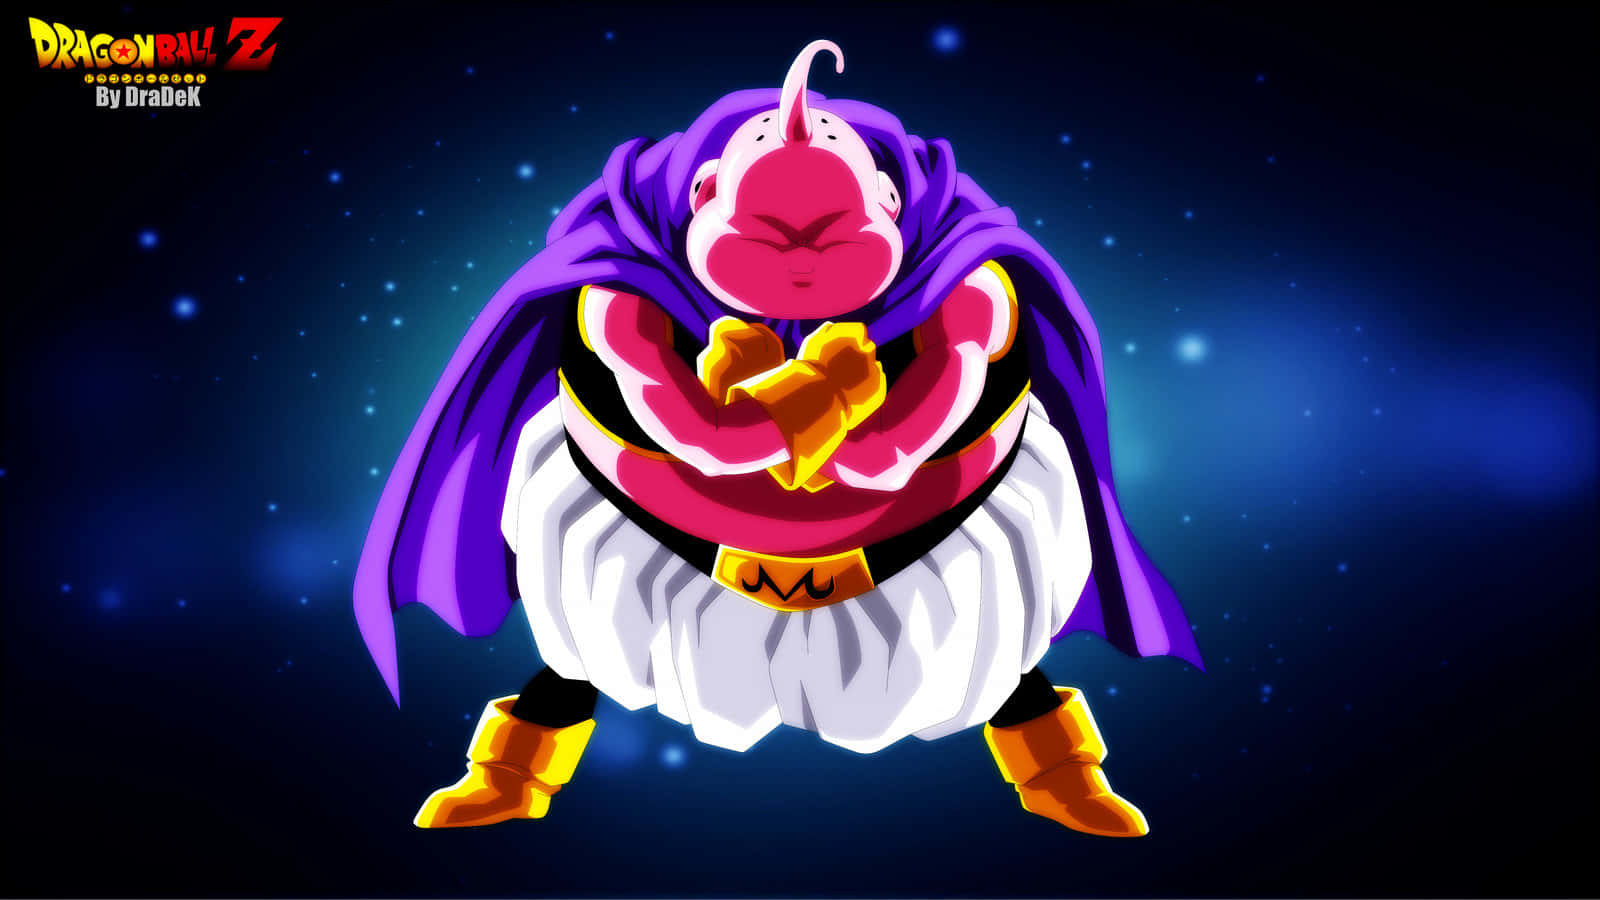 Statue of Buu showing its love of peace and tranquility" Wallpaper